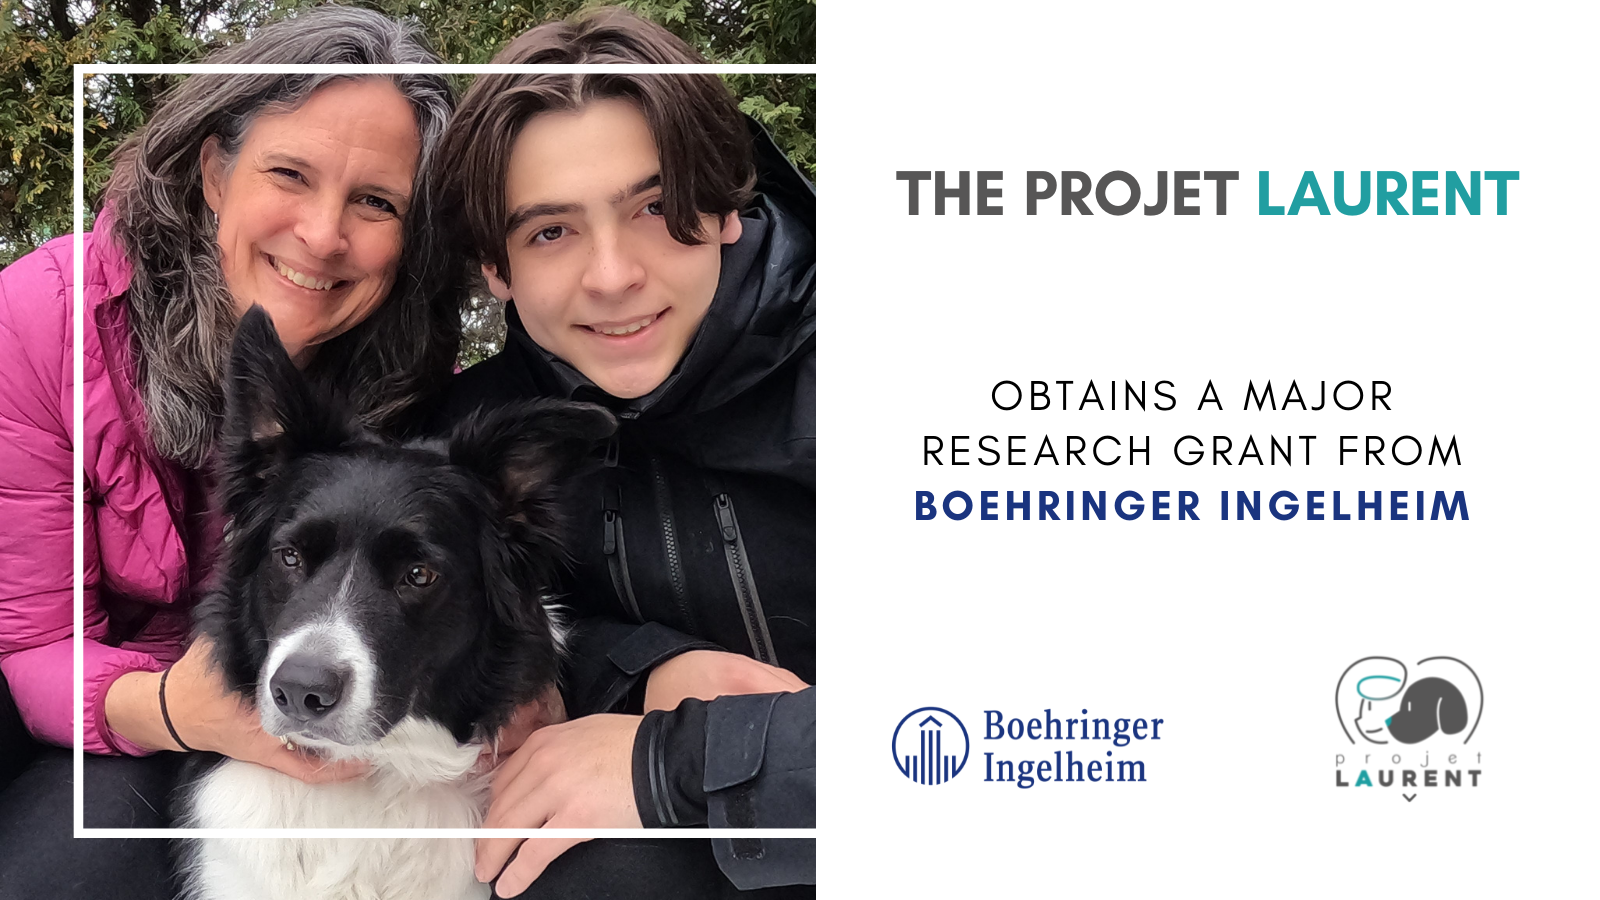 The Projet Laurent obtains a major research grant from Boehringer Ingelheim  – Canadian Donation and Transplantation Research Program